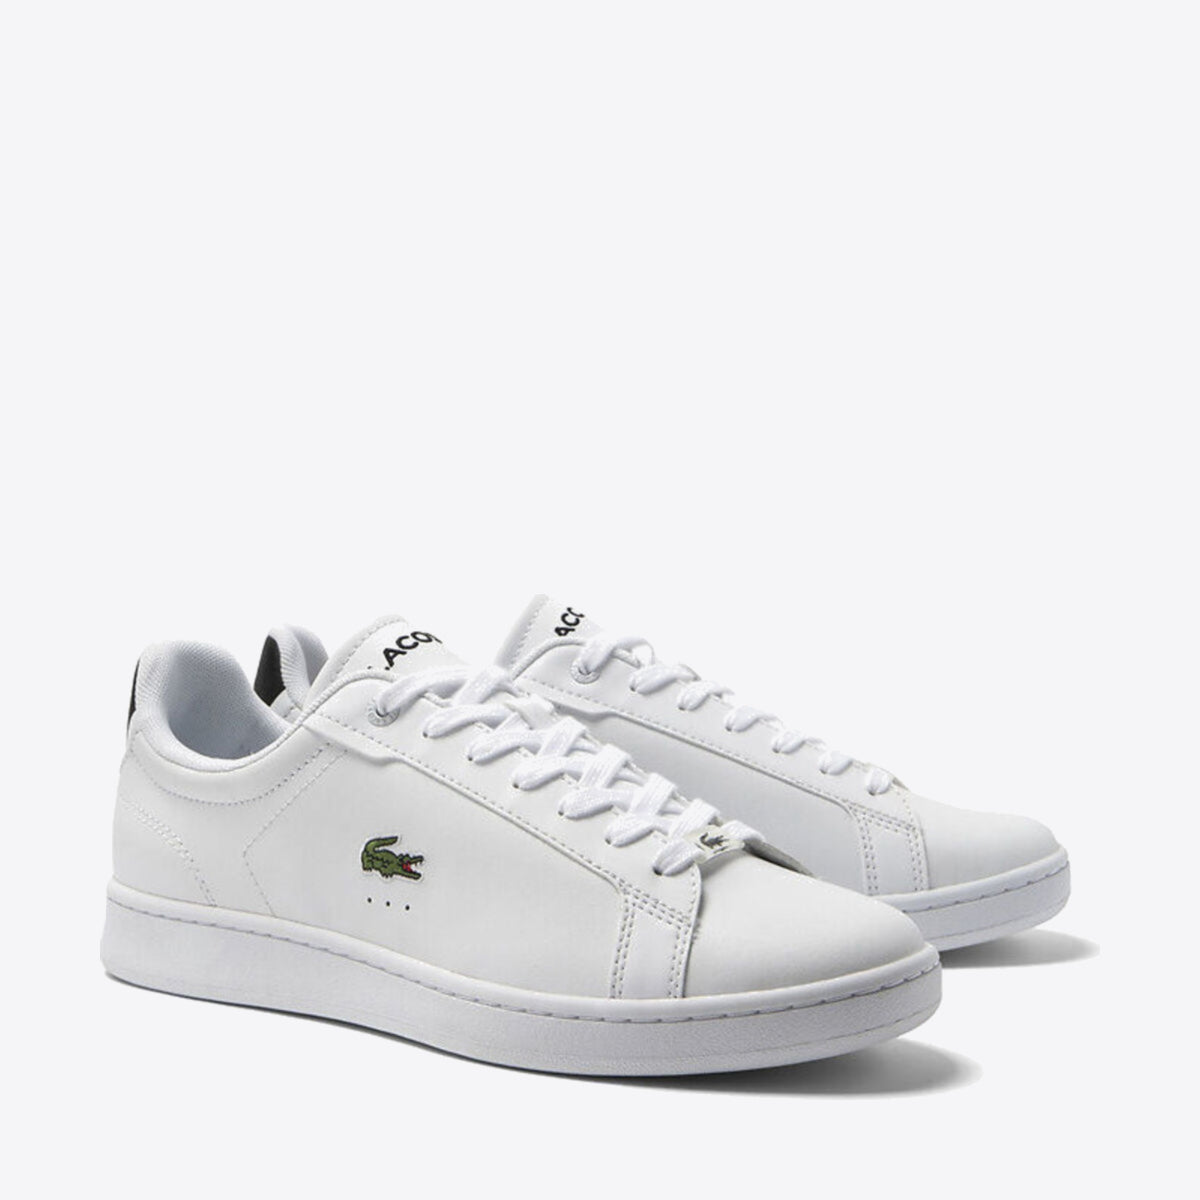 LACOSTE Carnaby Pro 123 White/Black - Image 2